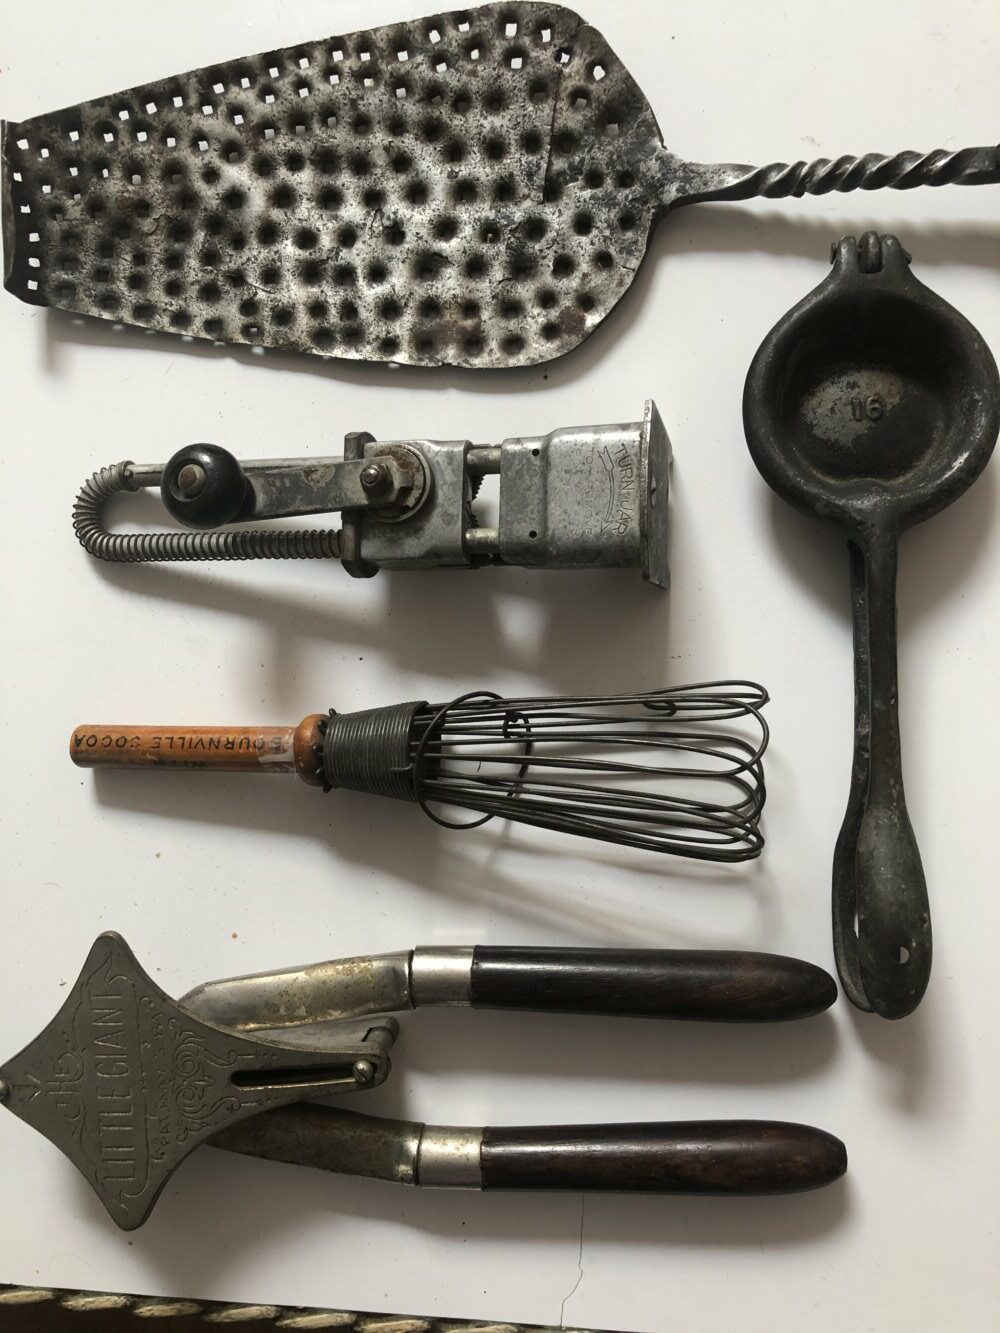 A Historic Kitchen Utensil Captures What it Takes to Make Hot